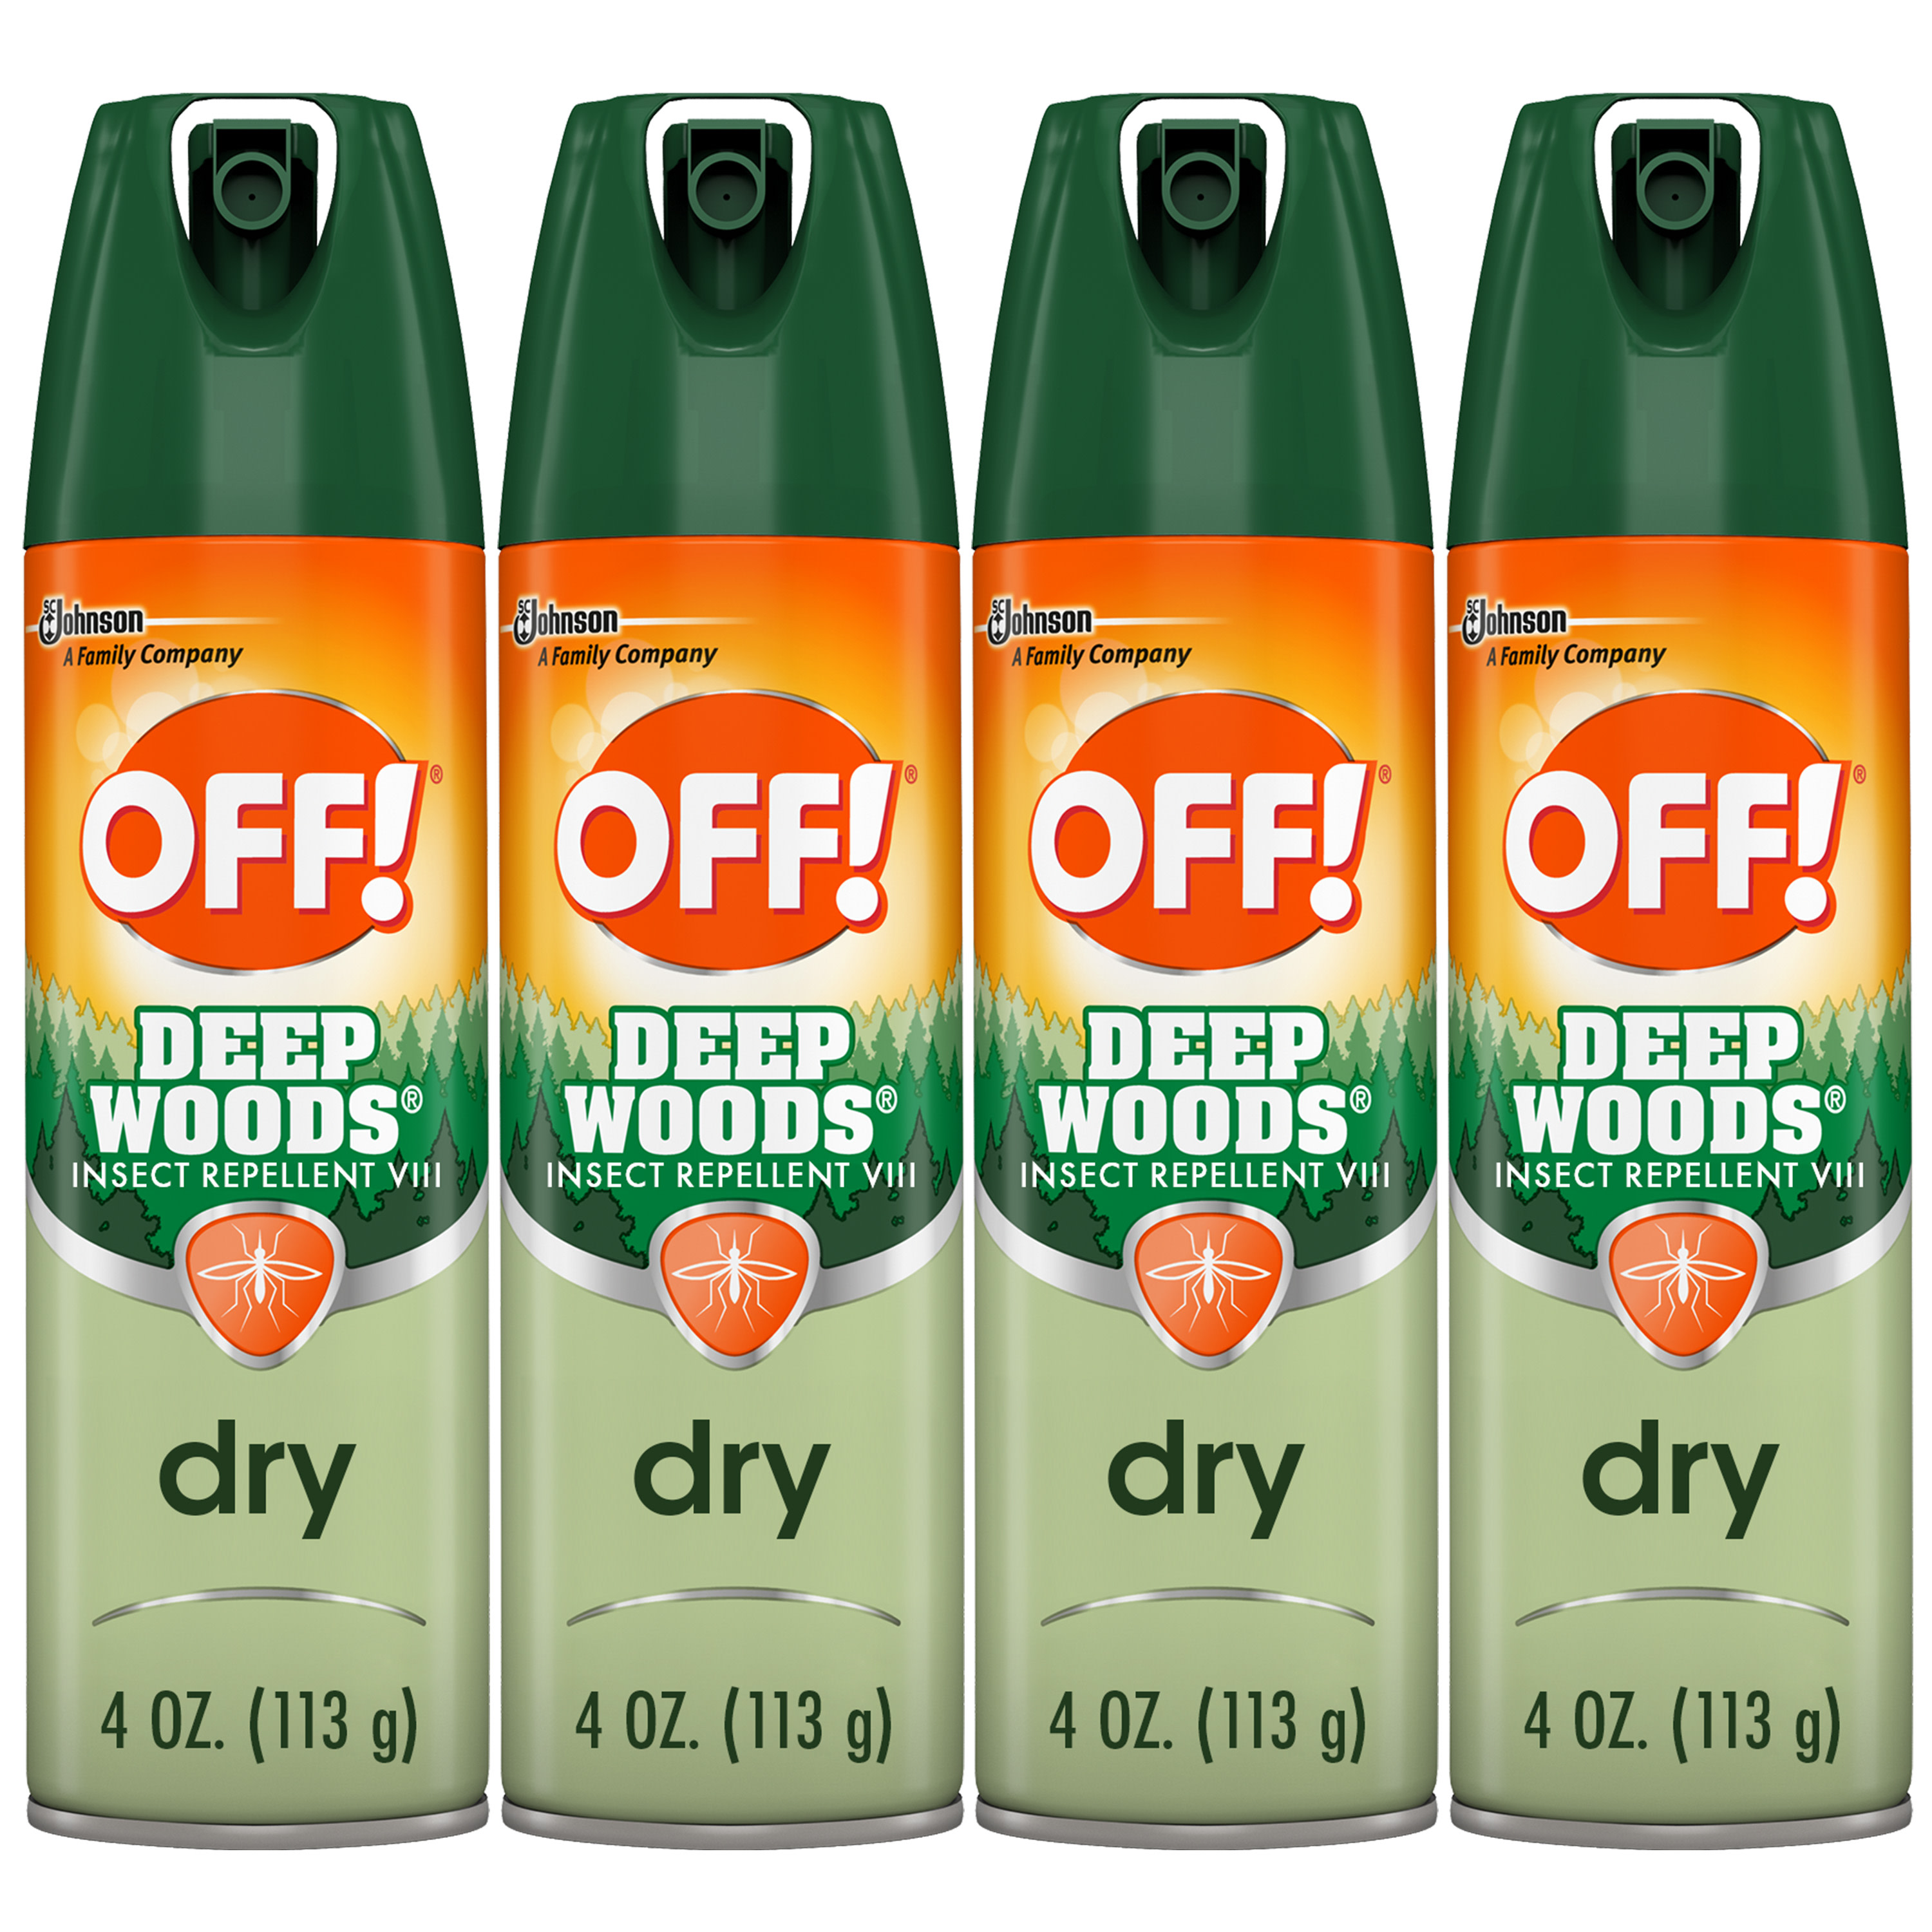 OFF! Deep Woods Dry Insect Repellent VIII, up to 8 Hour Mosquito Protection, 4 oz, 4 Count - image 1 of 17